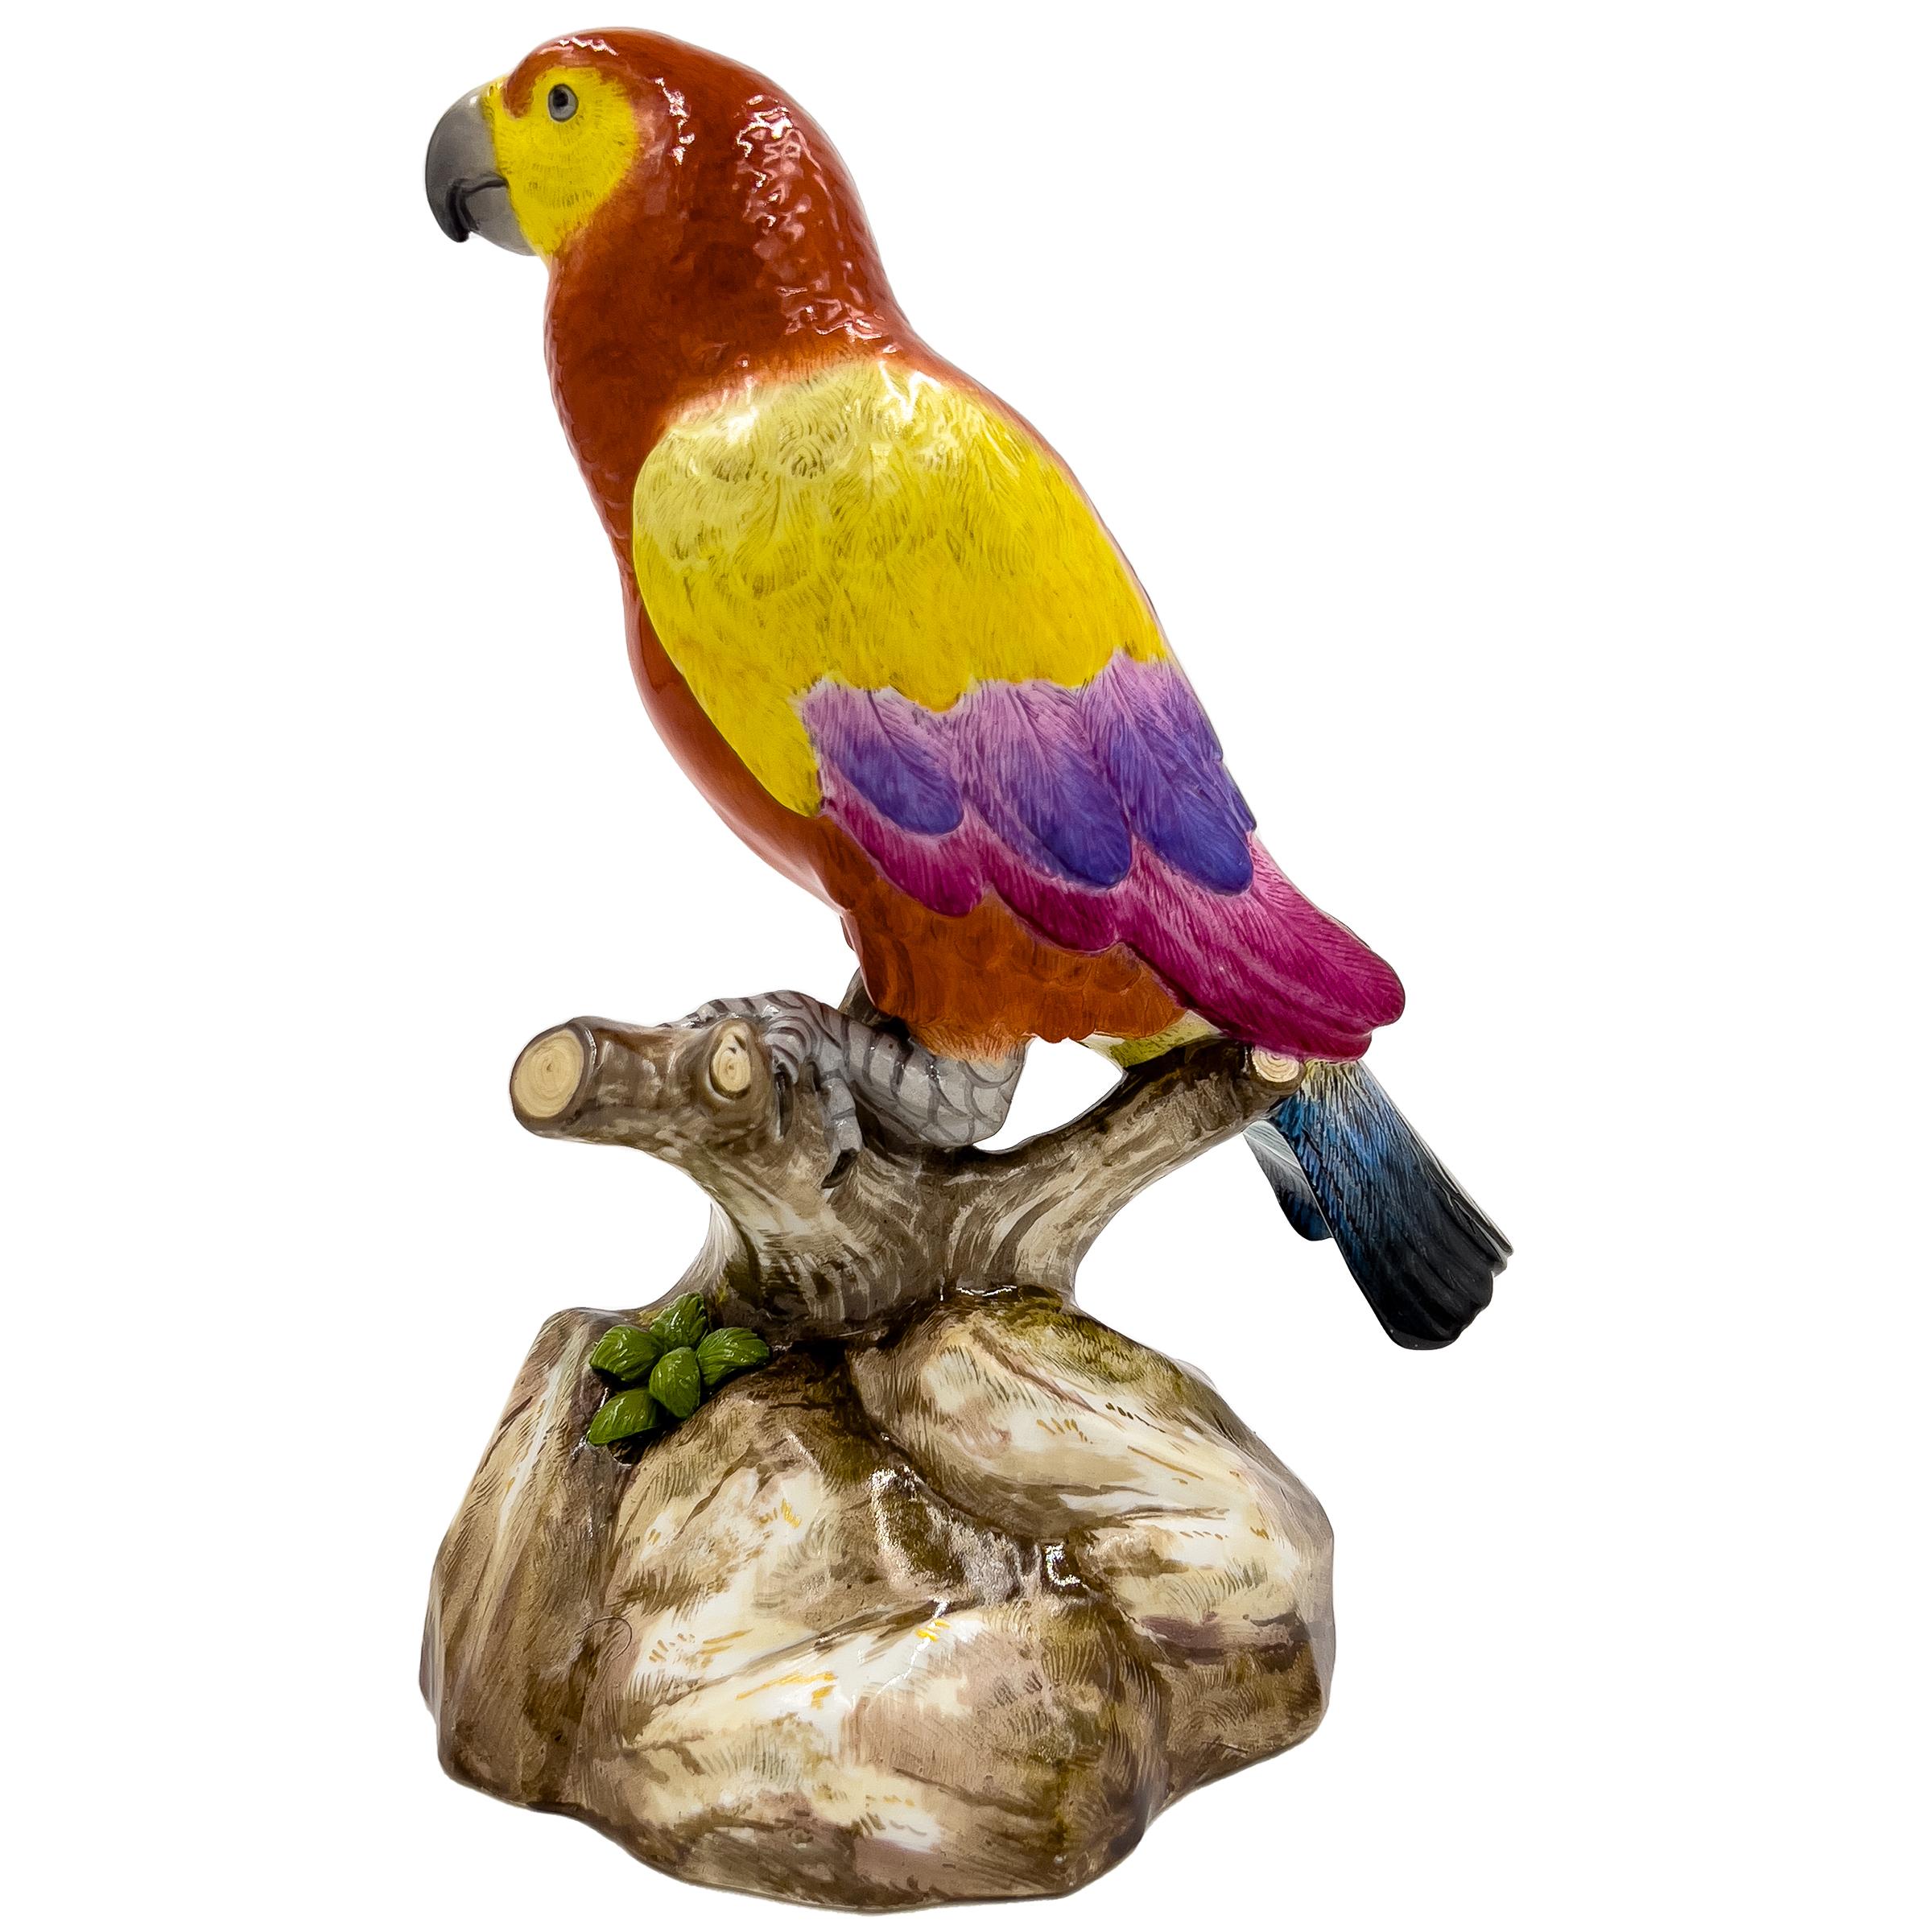 19th-century Meissen Figure featuring a vibrant and lifelike portrayal of a Parrot on Branch. This meticulously crafted masterpiece showcases multi-colour detailing, bears the authentic Meissen signature on its base.
